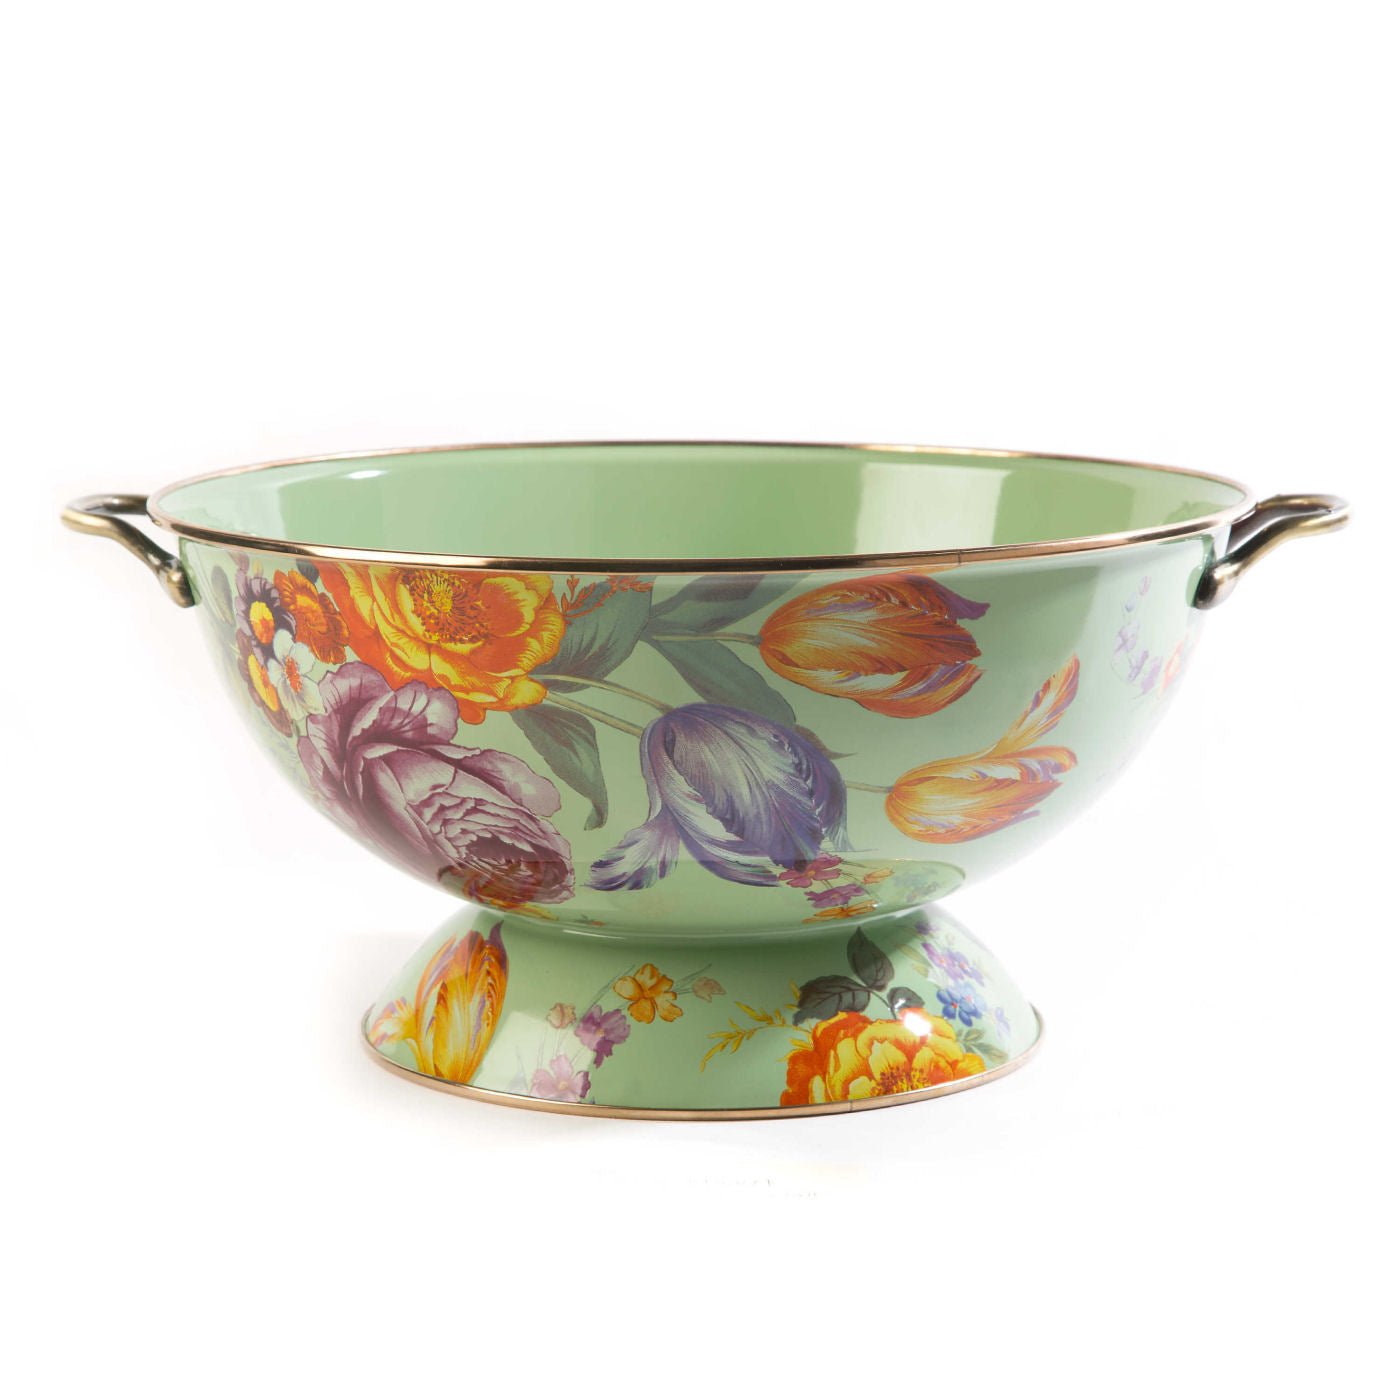 Flower Market Everything Bowl - Green by Mackenzie Childs - |VESIMI Design| Luxury and Rustic bathrooms online